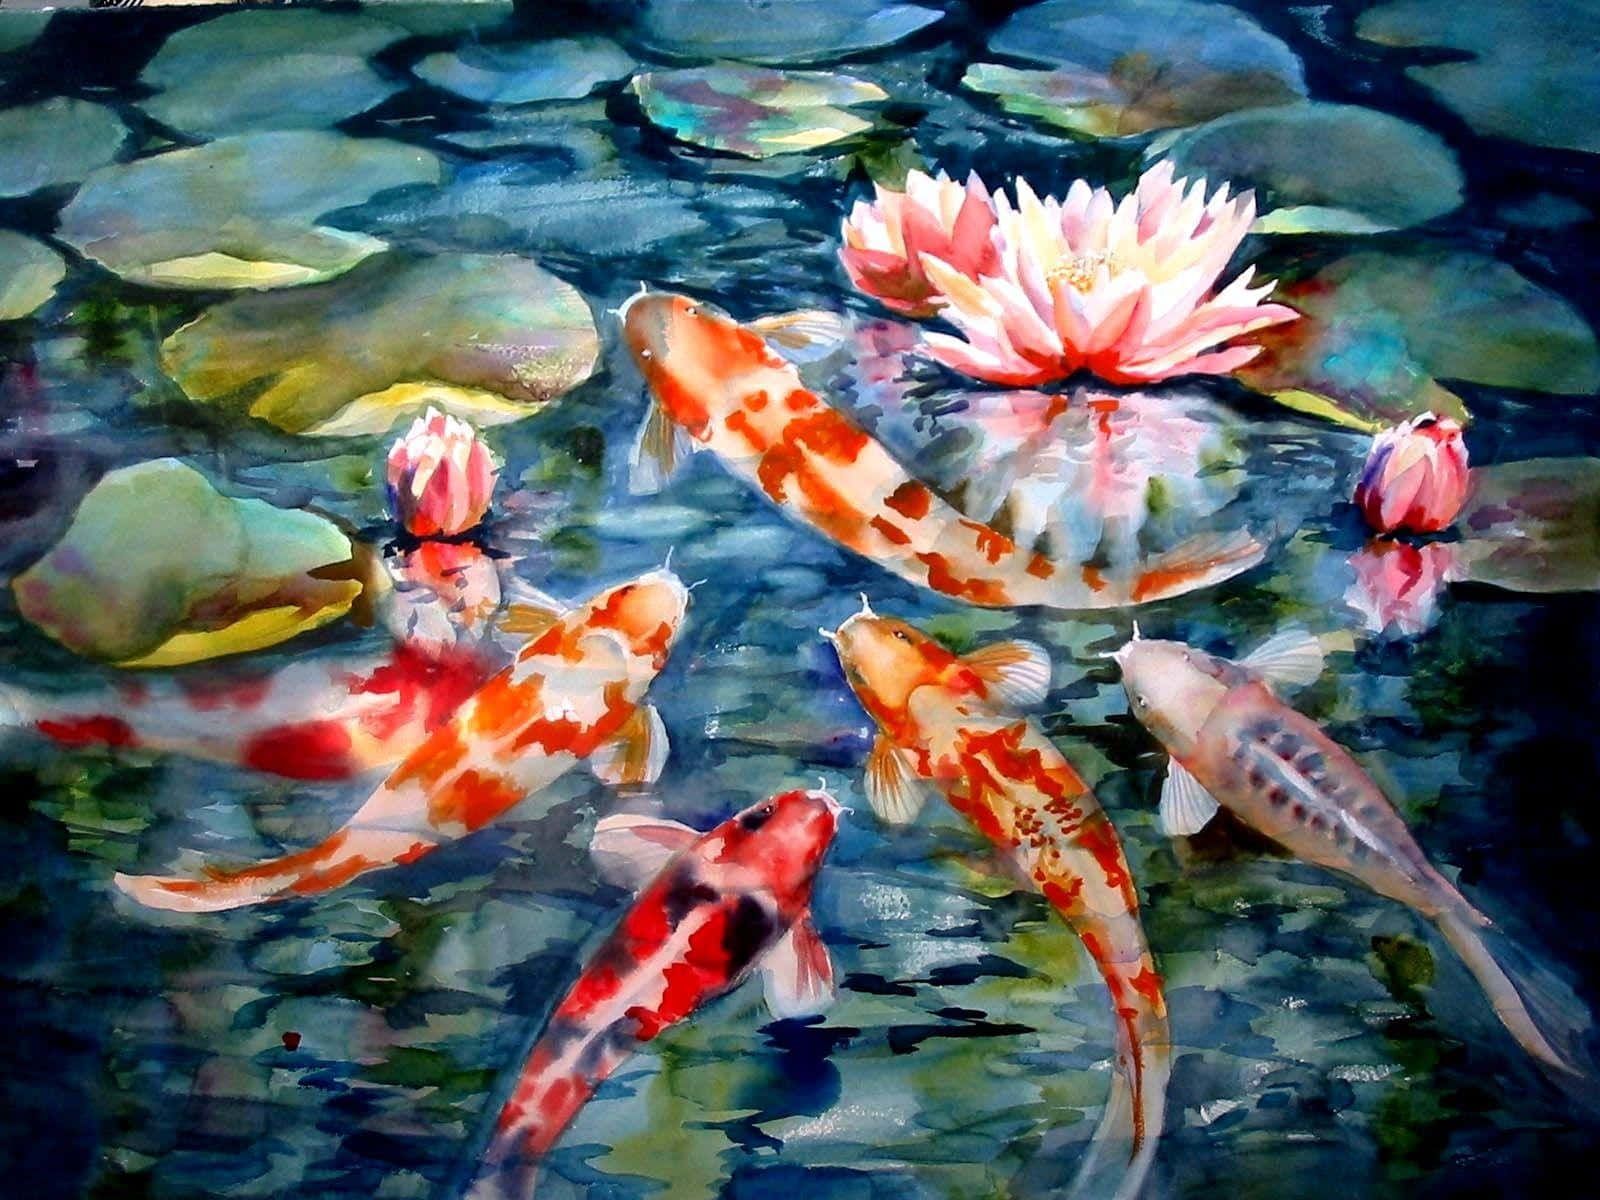 Koi Fish In A Pond With Lily Pads